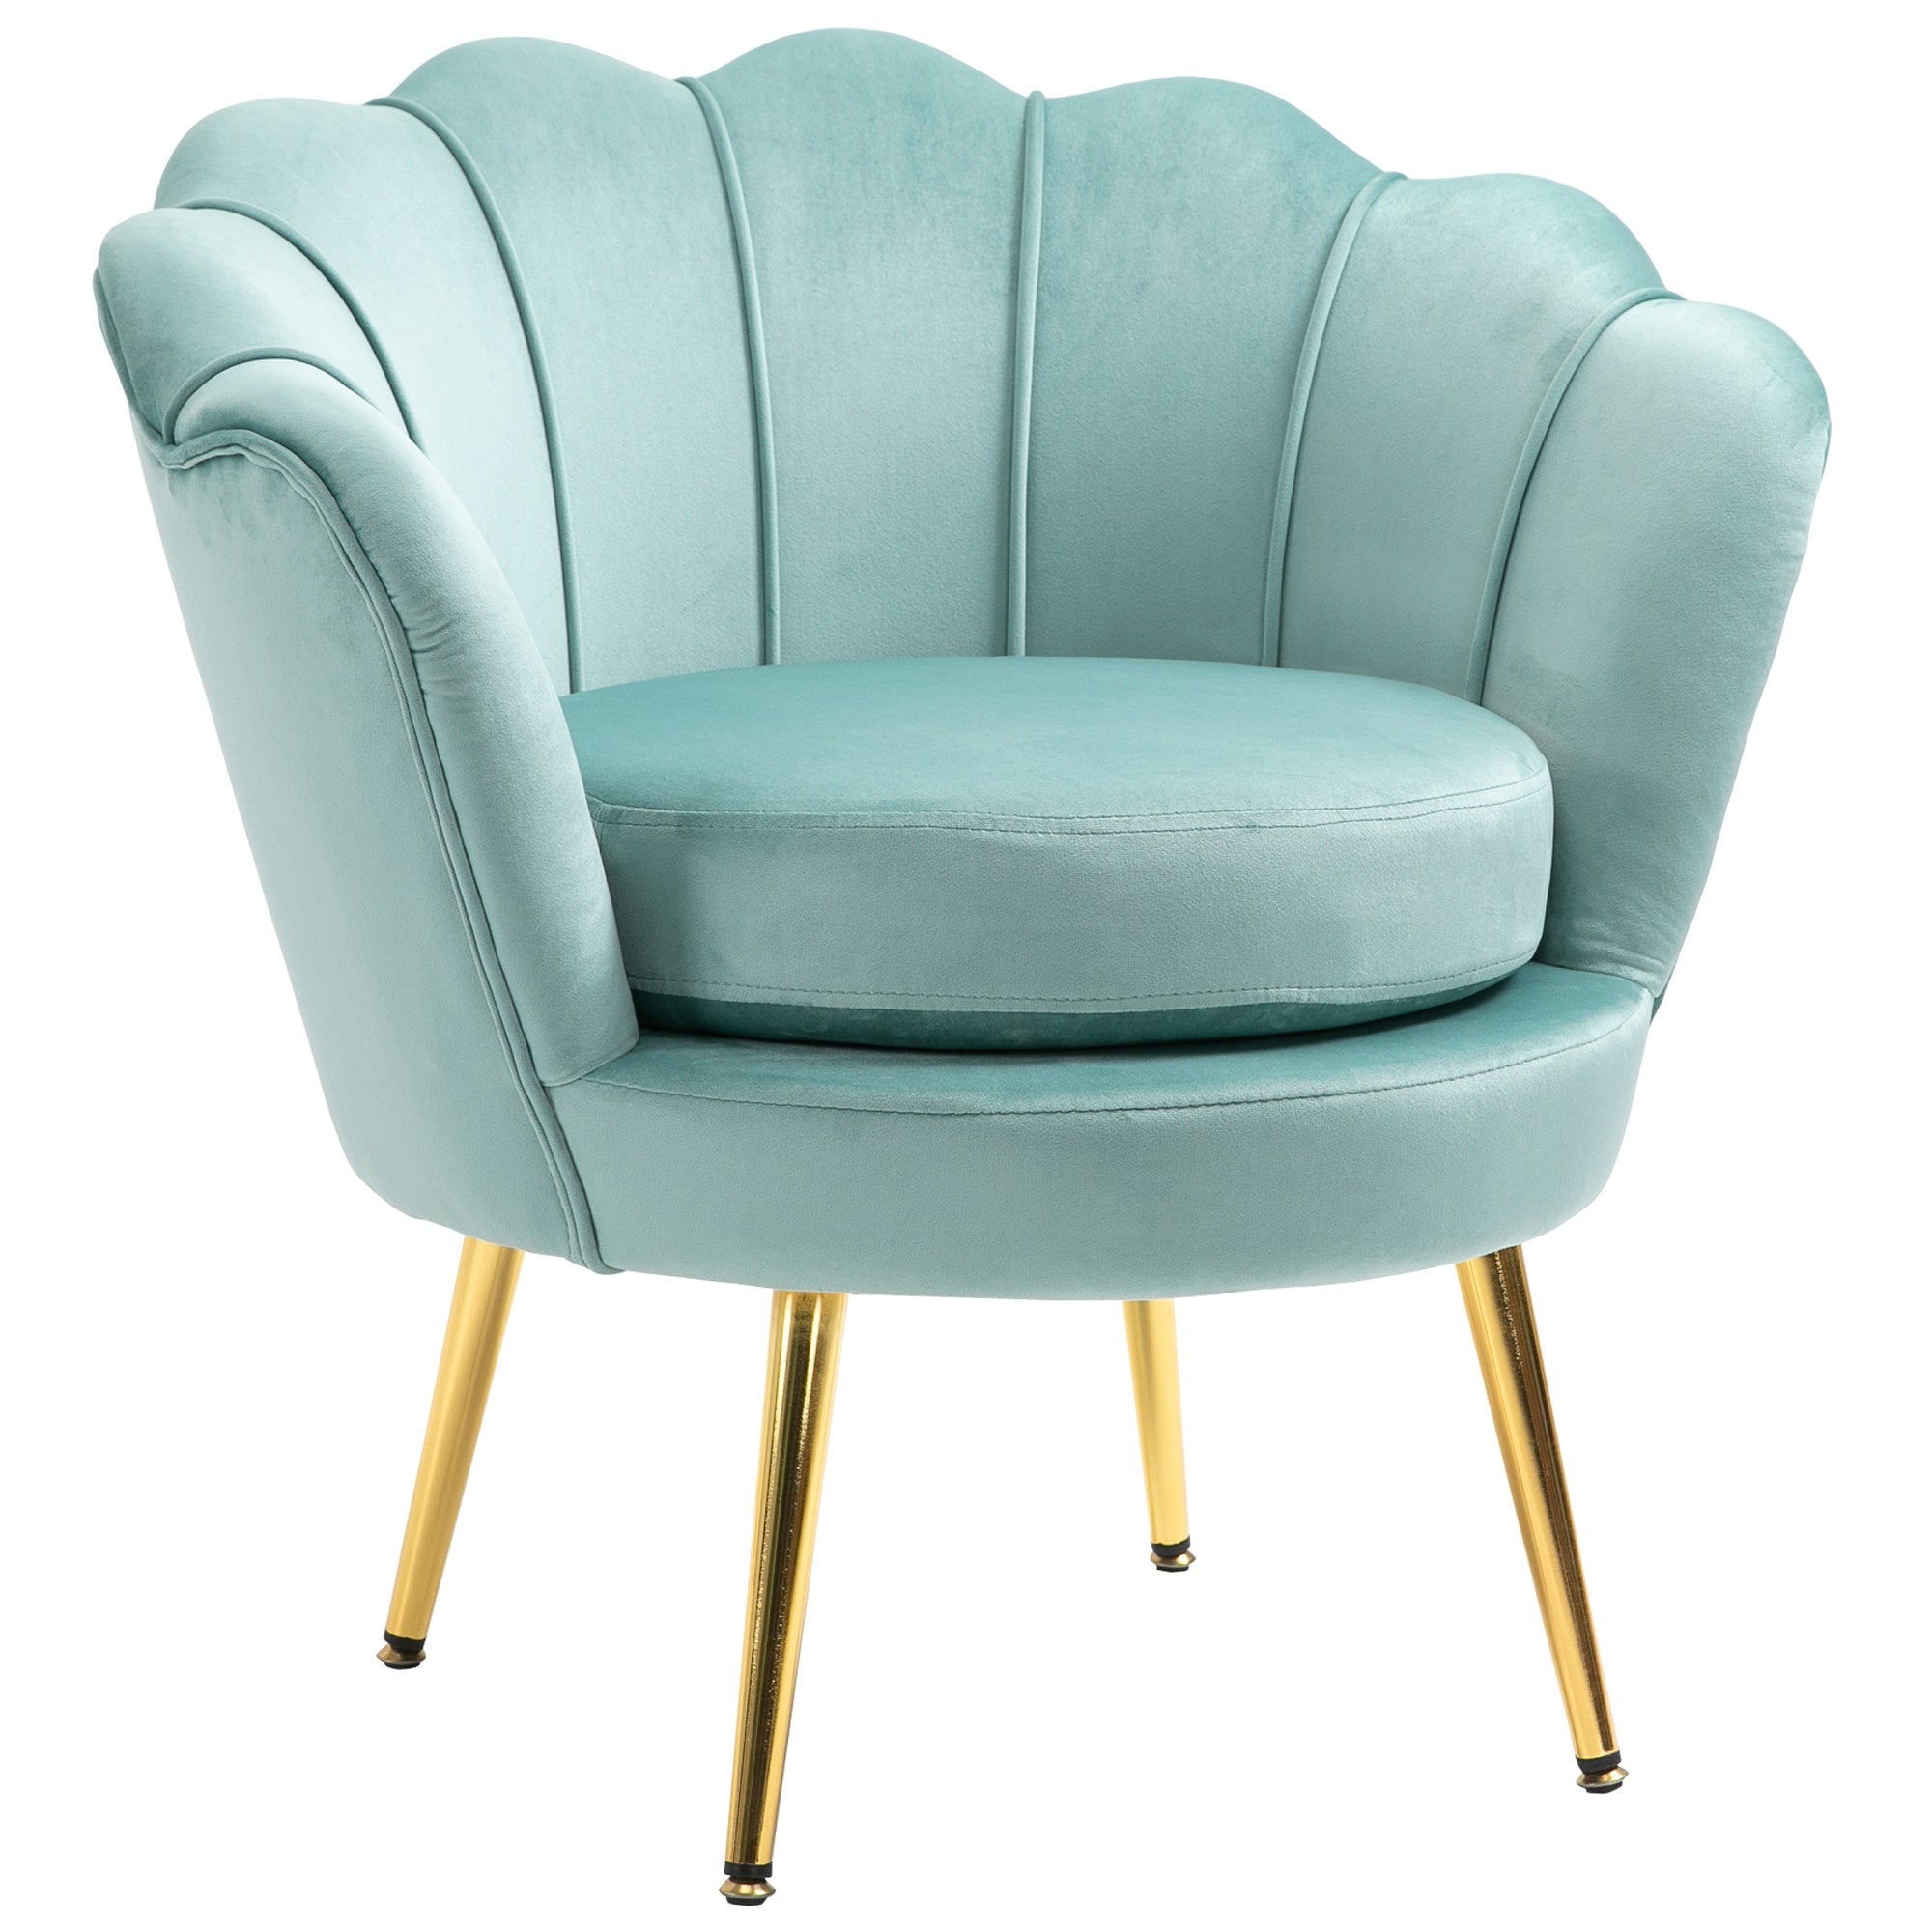 Elegant Velvet Fabric Accent Chair/Leisure Club Chair with Gold Metal Legs for Living Room